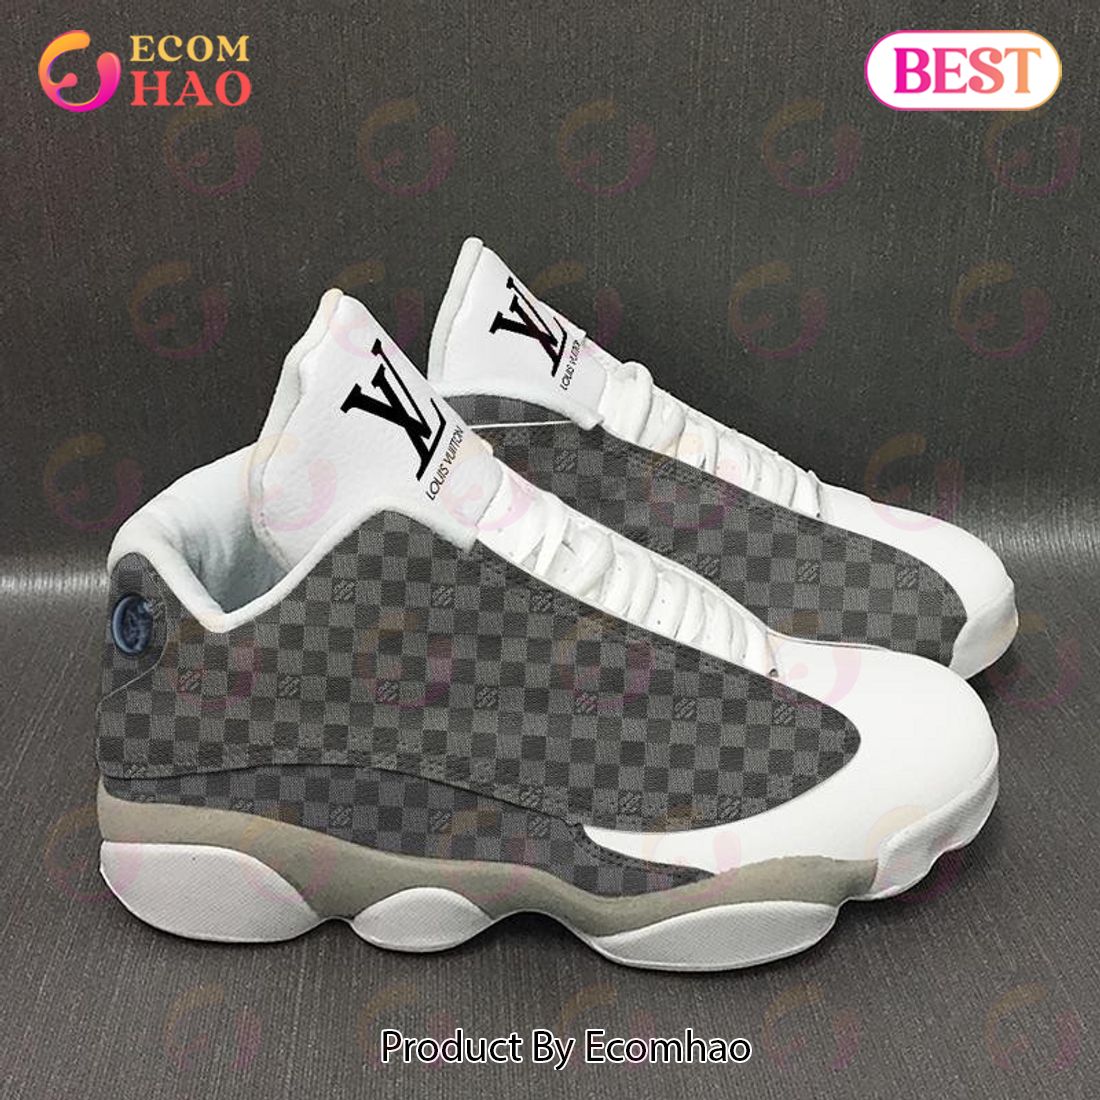 Louis Vuitton Air Jordan 13 Red Black LV Shoes, Sneakers - Ecomhao Store